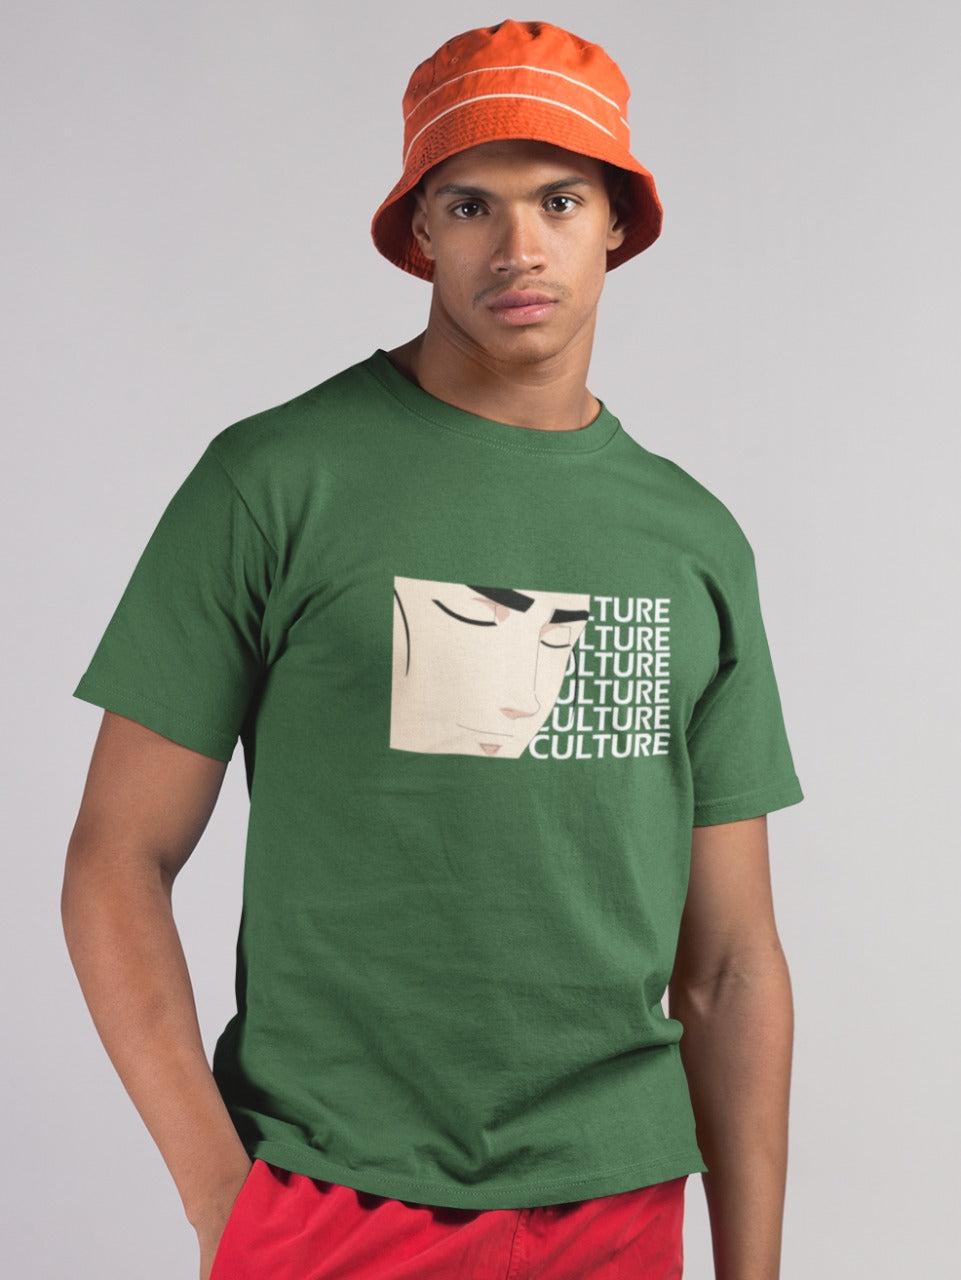 man wearing an orange duffel hat with olive green tshirt with man of culture meme printed on it, anime internet memes